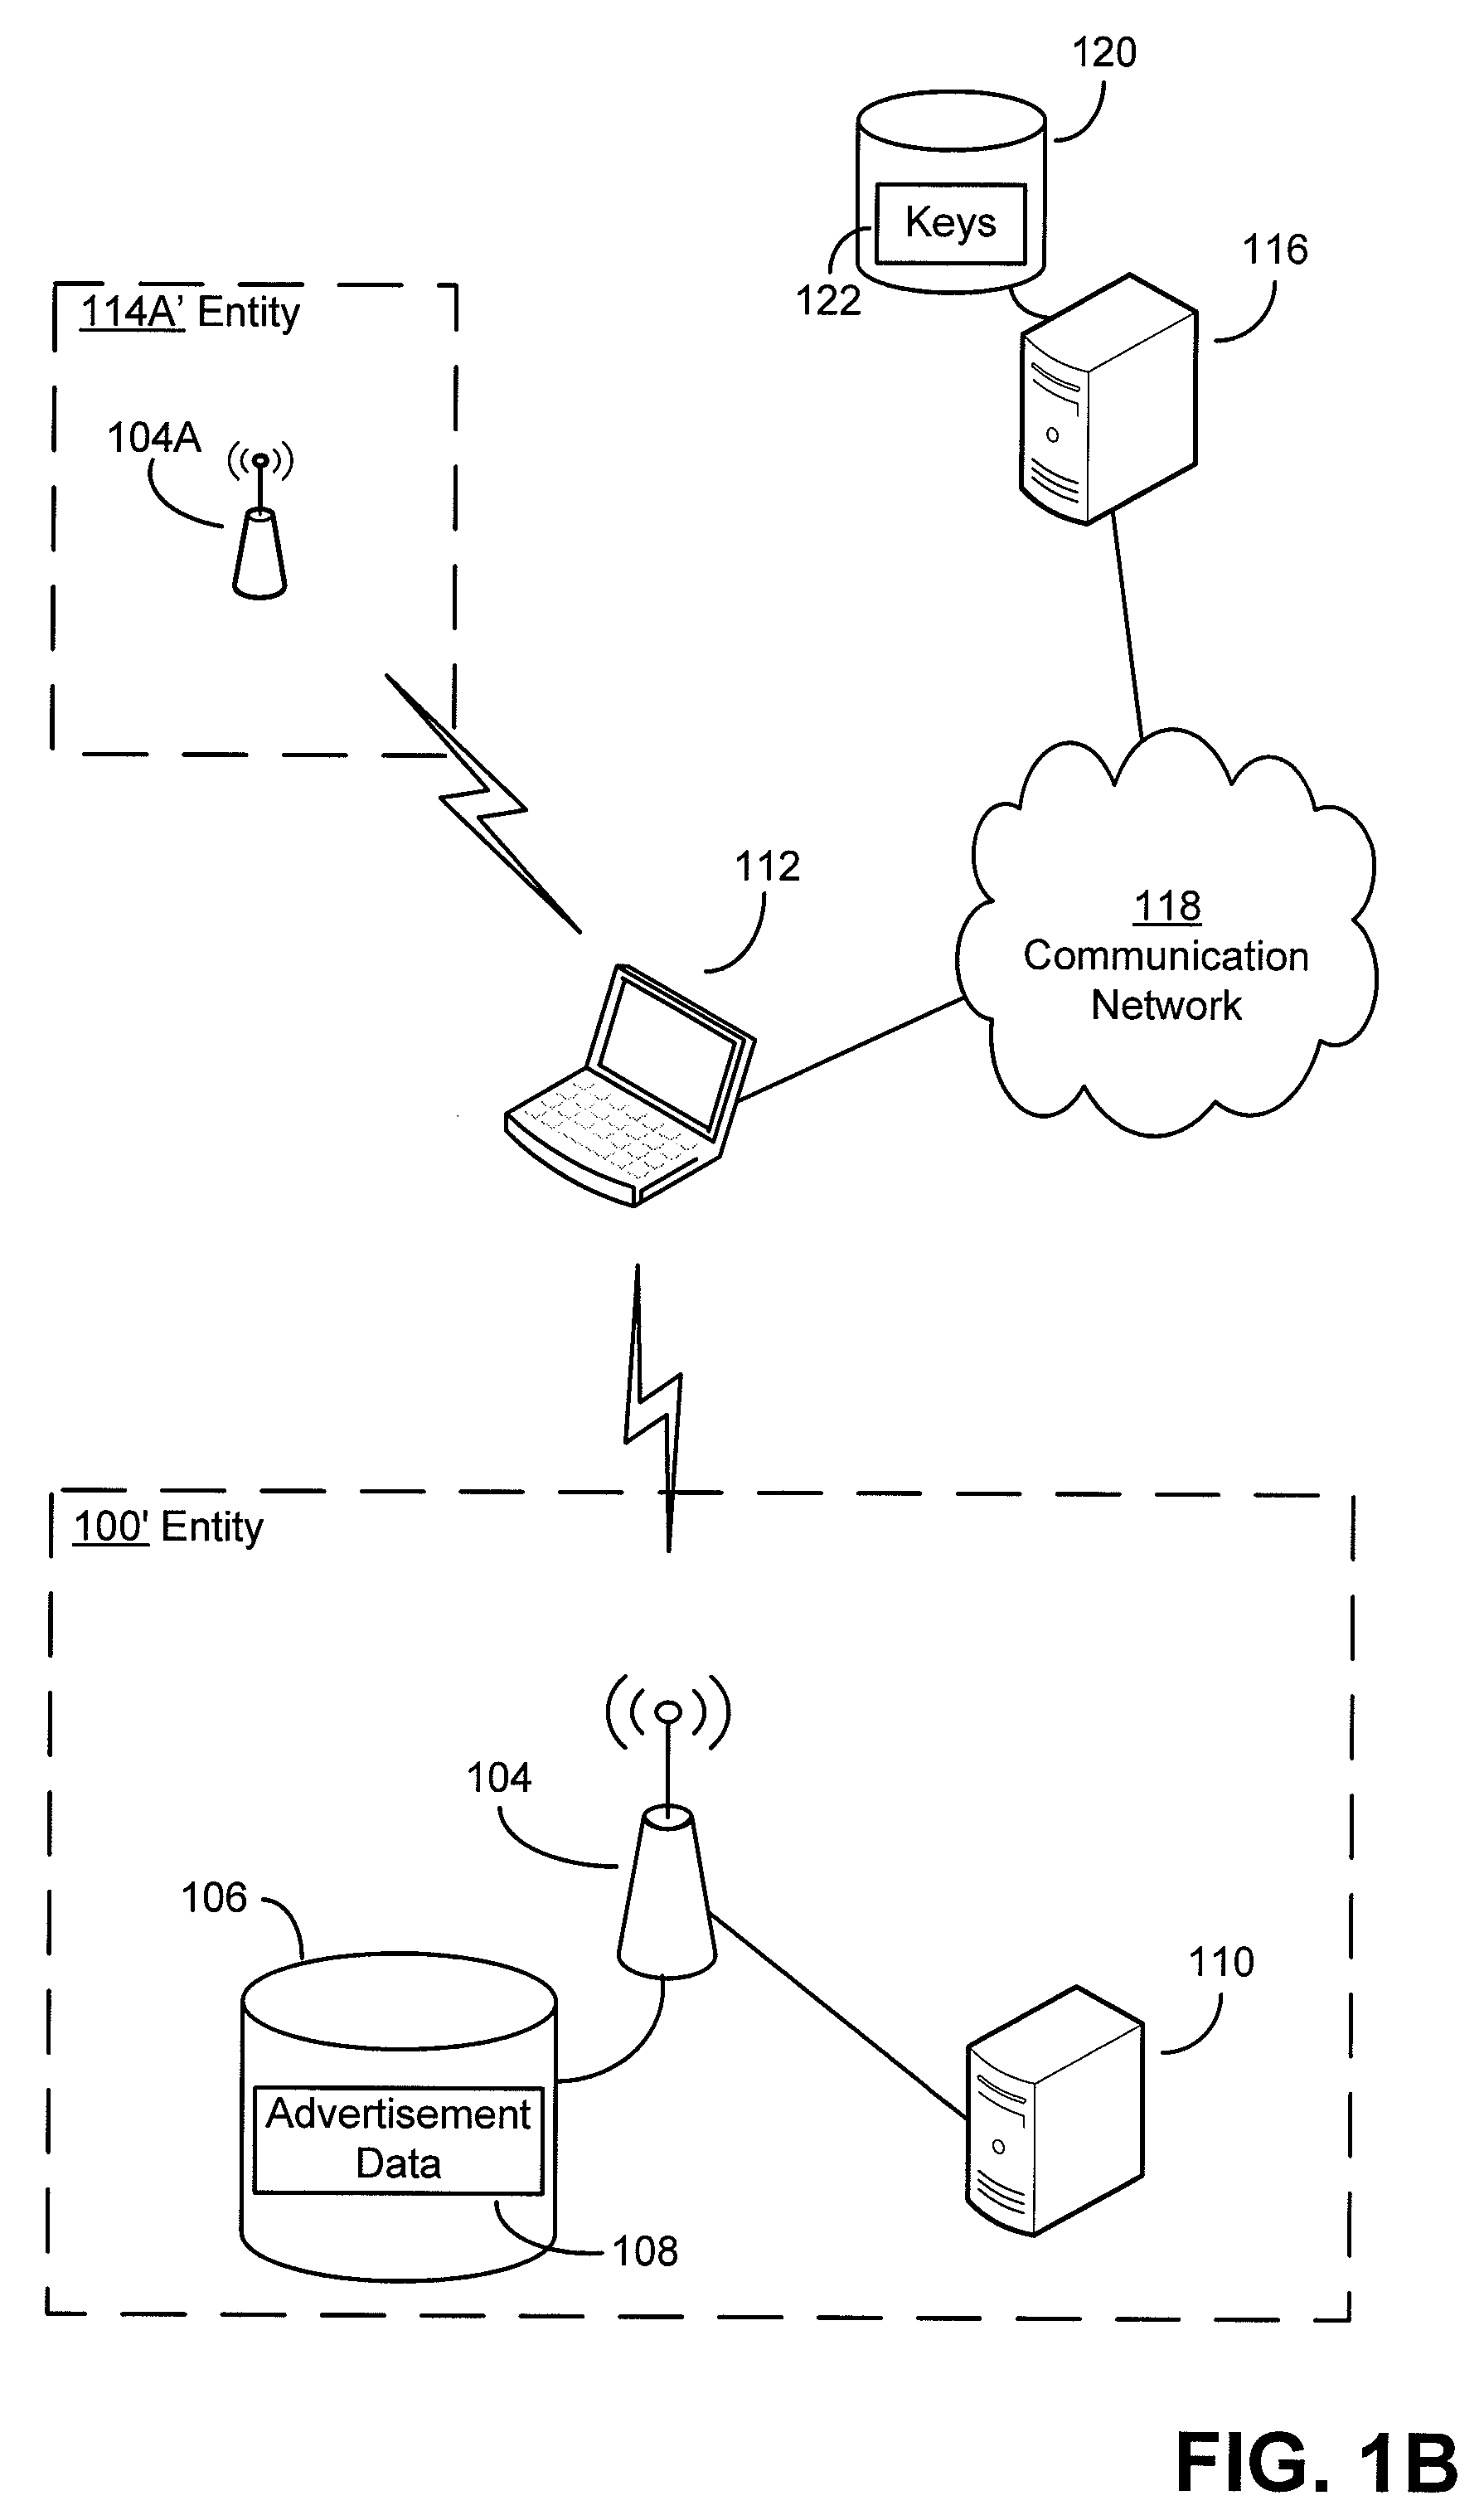 Authentication mechanisms for wireless networks